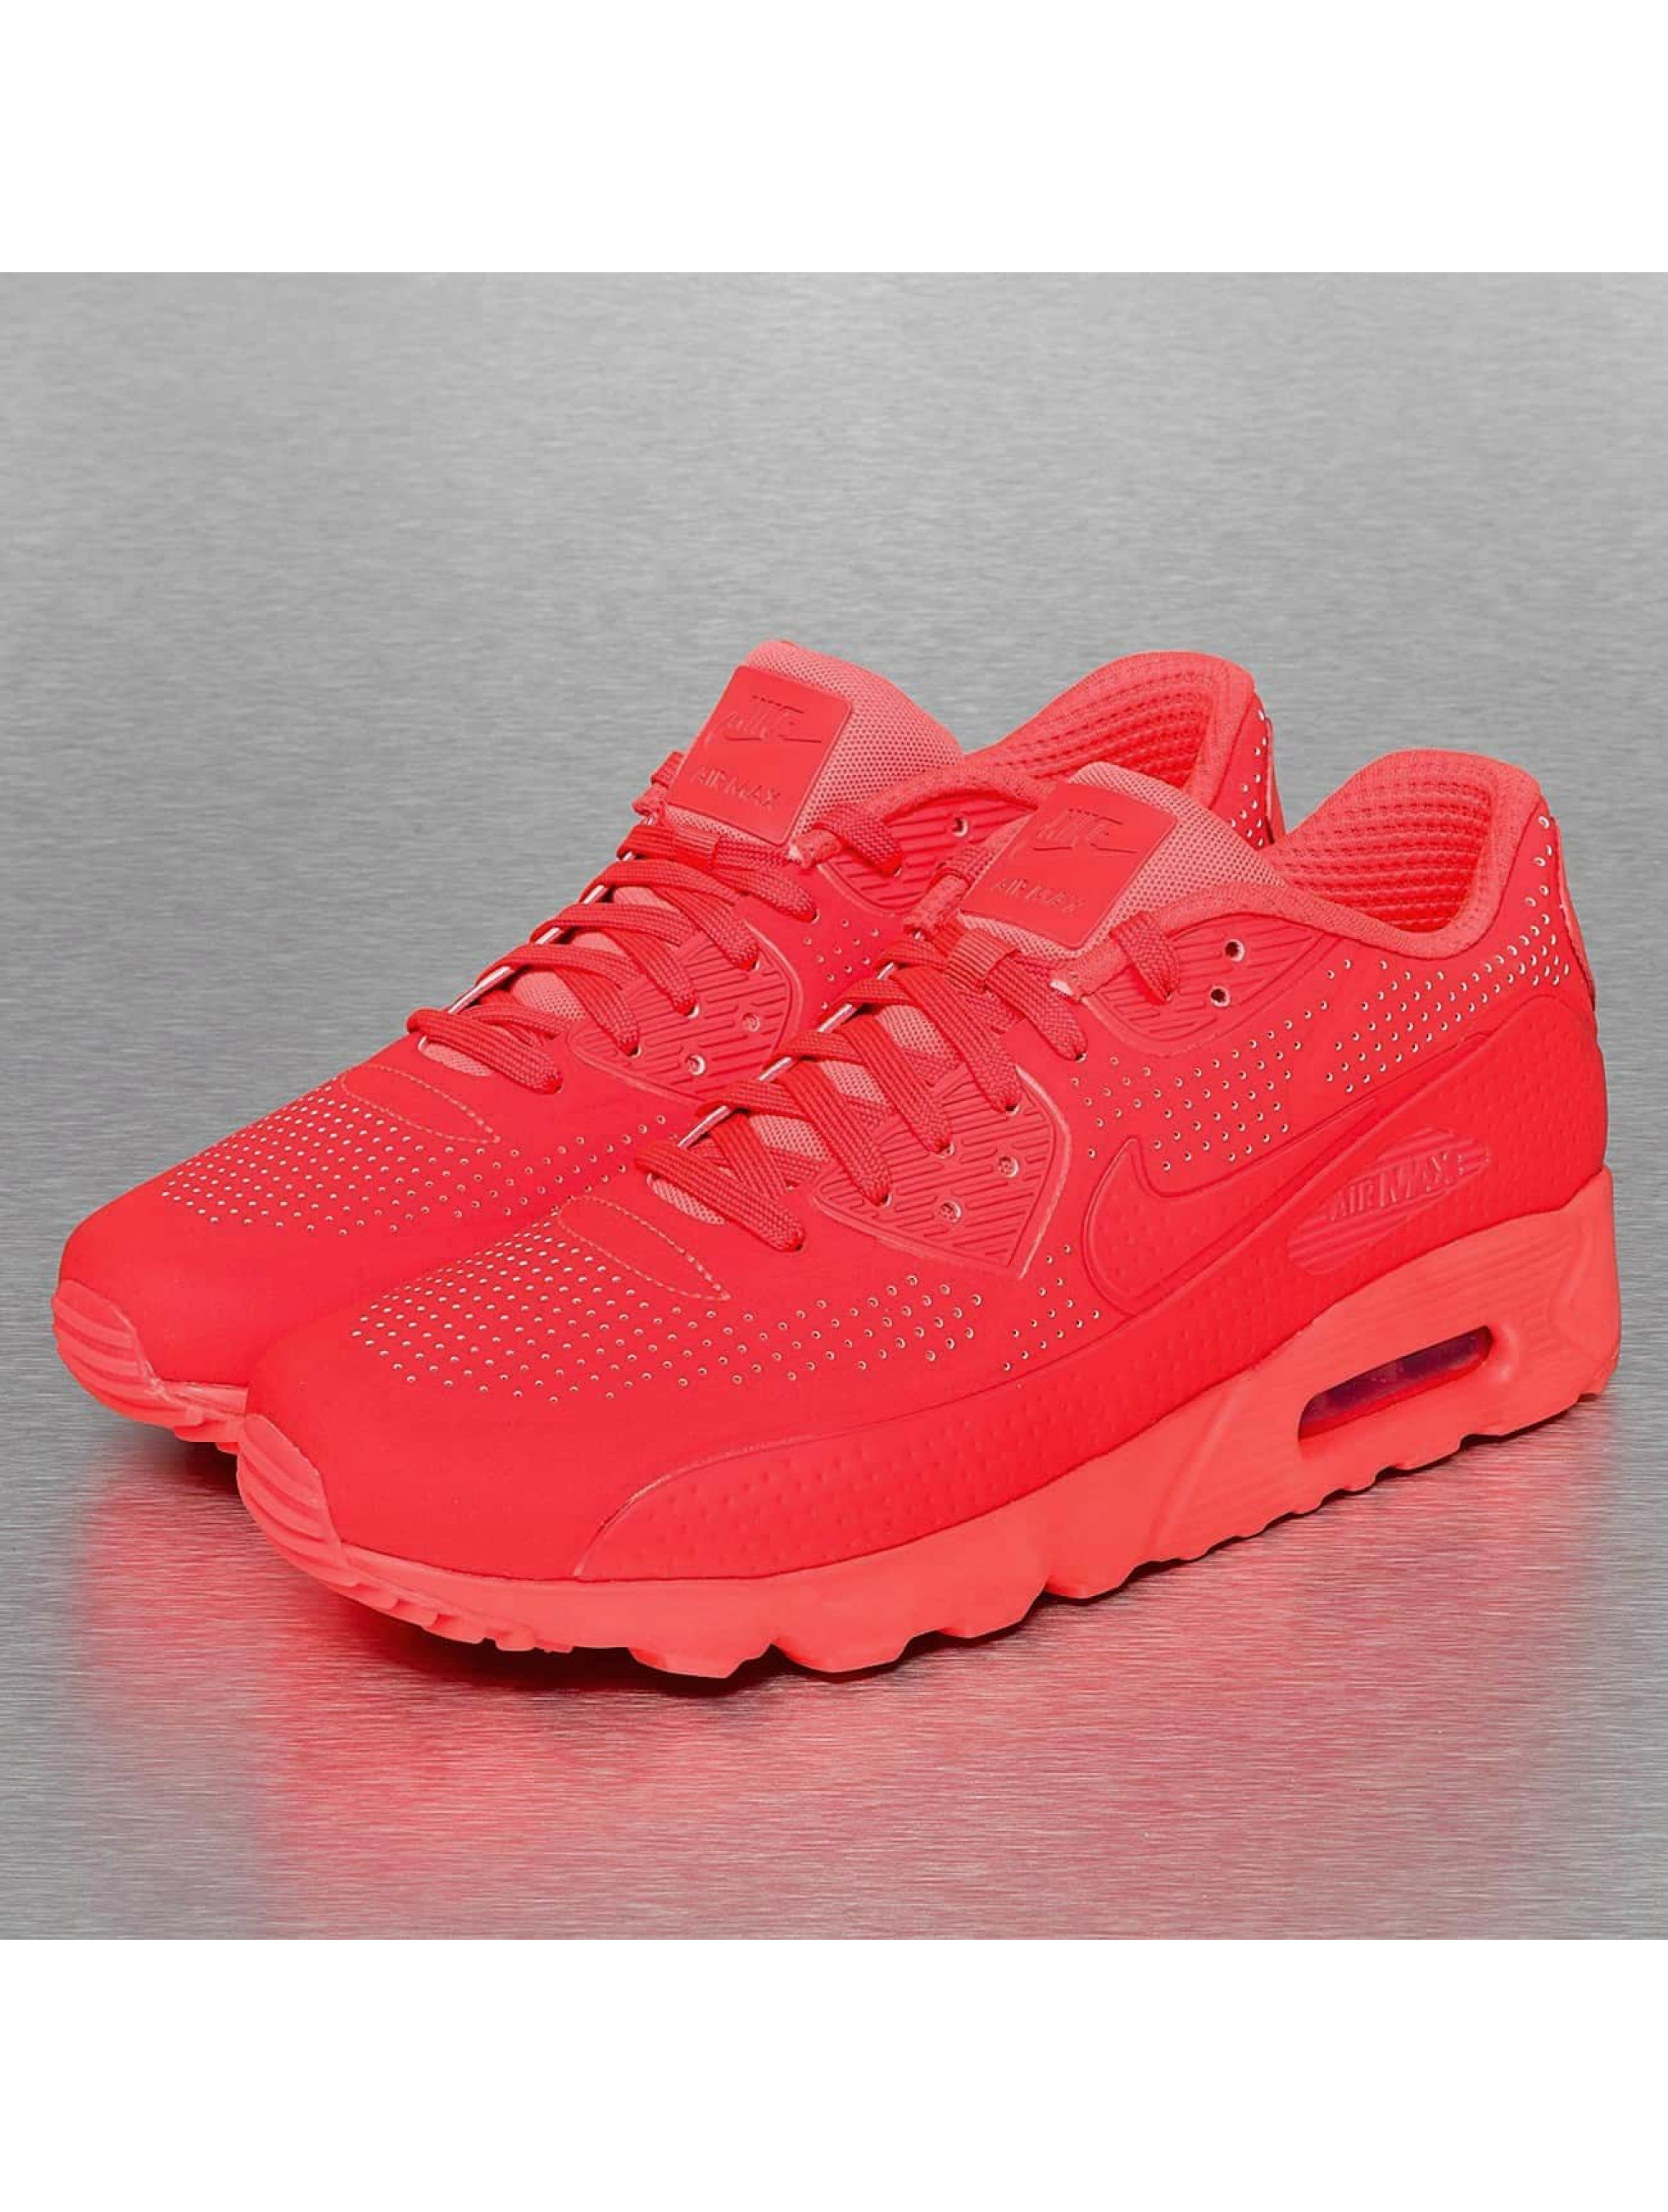 Nike Chaussures / Baskets Air Max 90 Ultra Moire en rouge